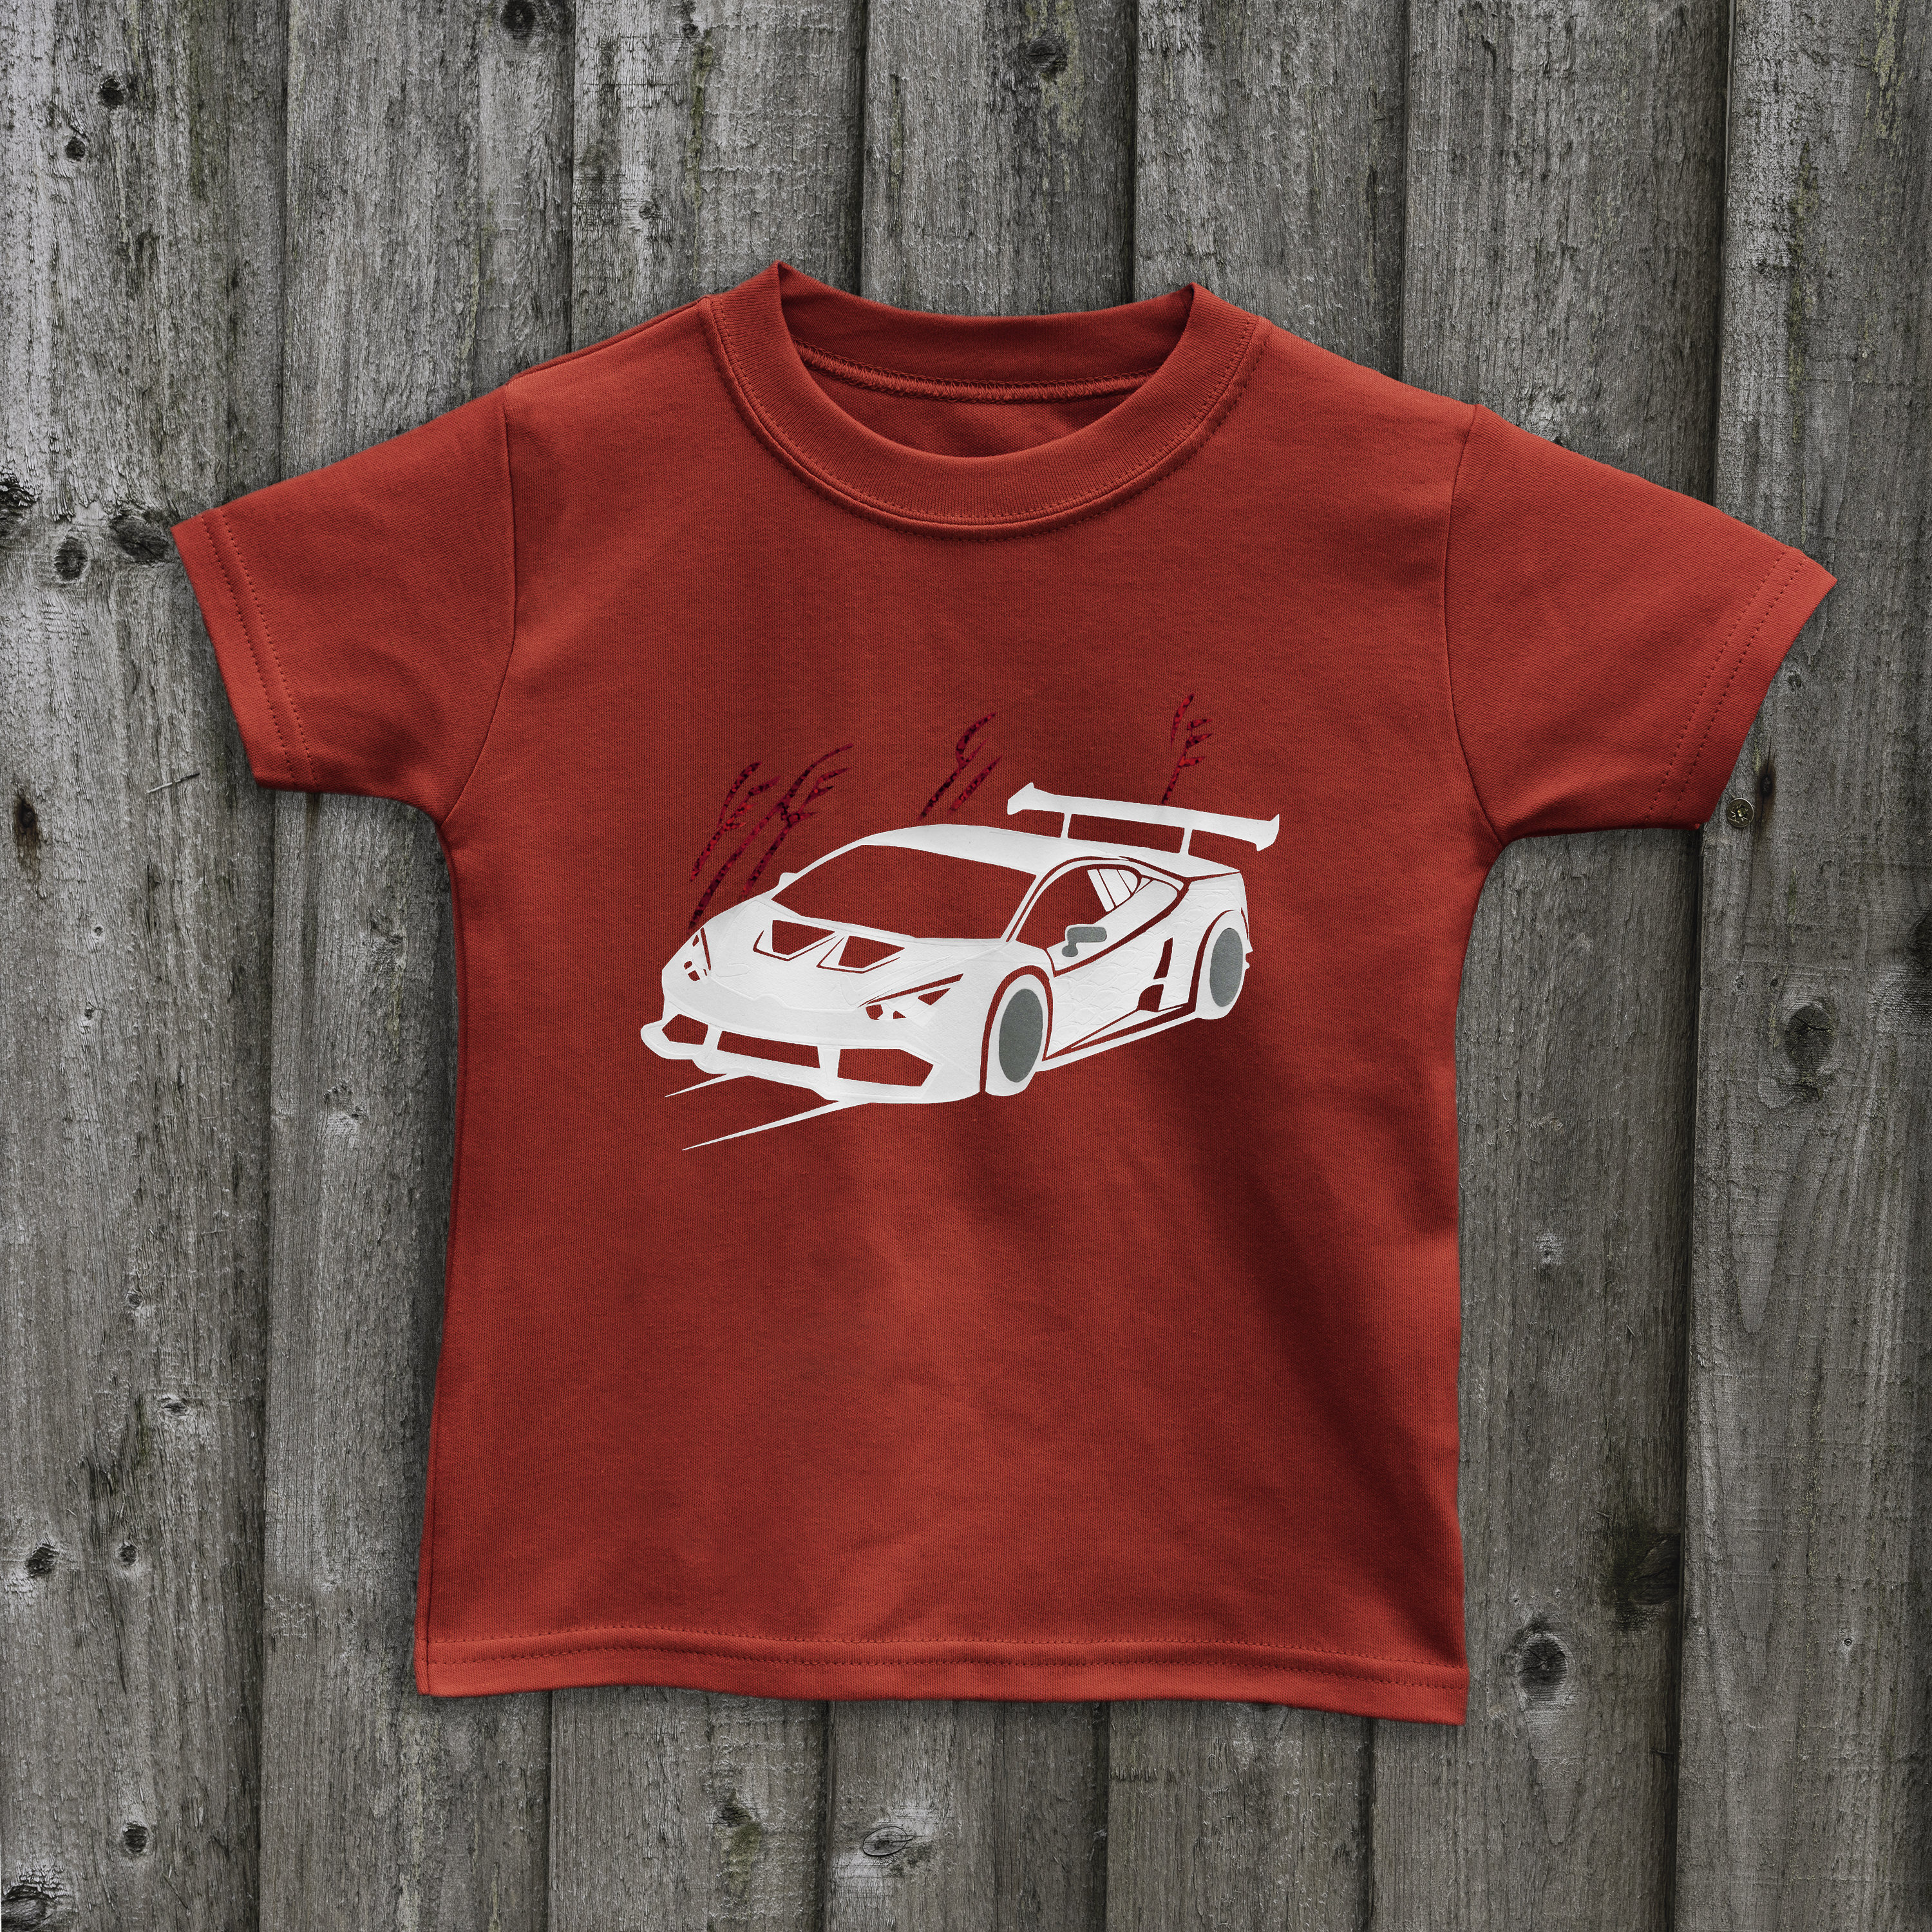 Sports Car T Gifts Presents Transport Kid Handmade Tops Tees Dark Great Etsy Car Shirt Car Cars Glow the - Uk Fast for Boys in Clothing Kids Boys